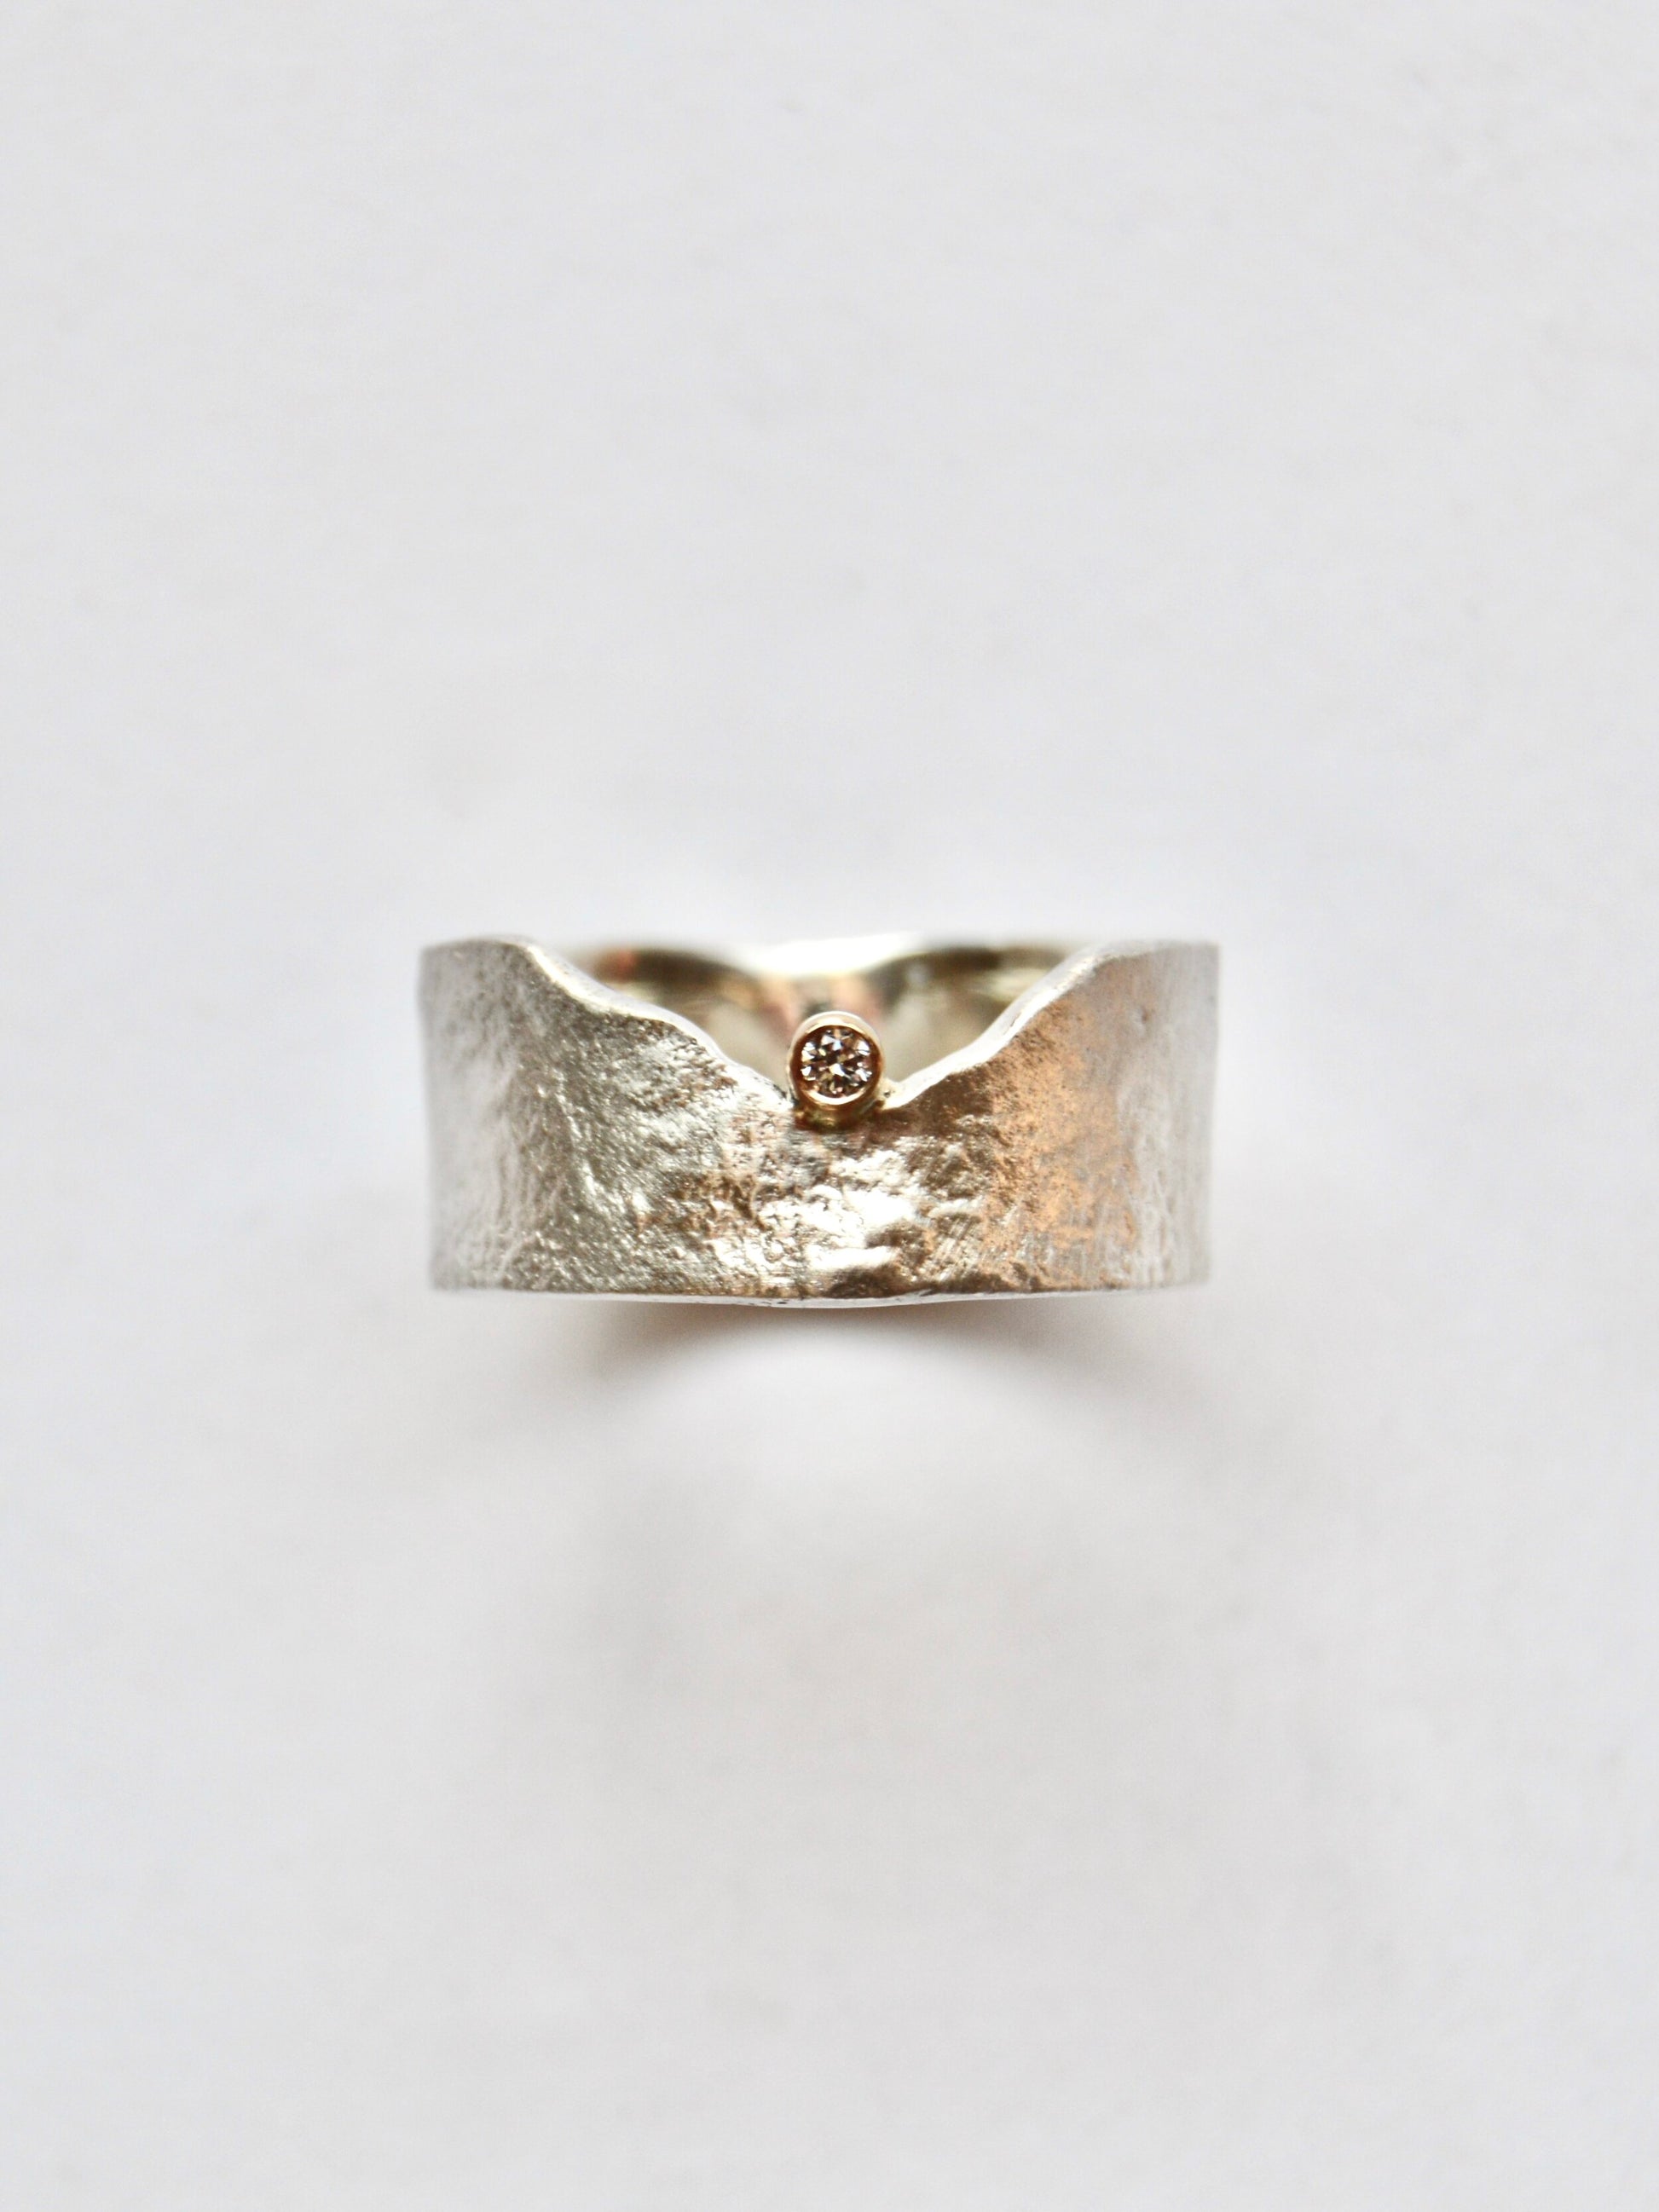 Made by hand in Northern New Mexico using recycled metals and responsibly sourced stones, this timeless, heirloom piece is sure to make a statement.  This ring features a Sterling Silver reticulated band with a recycled white diamond set in 14kt yellow gold.